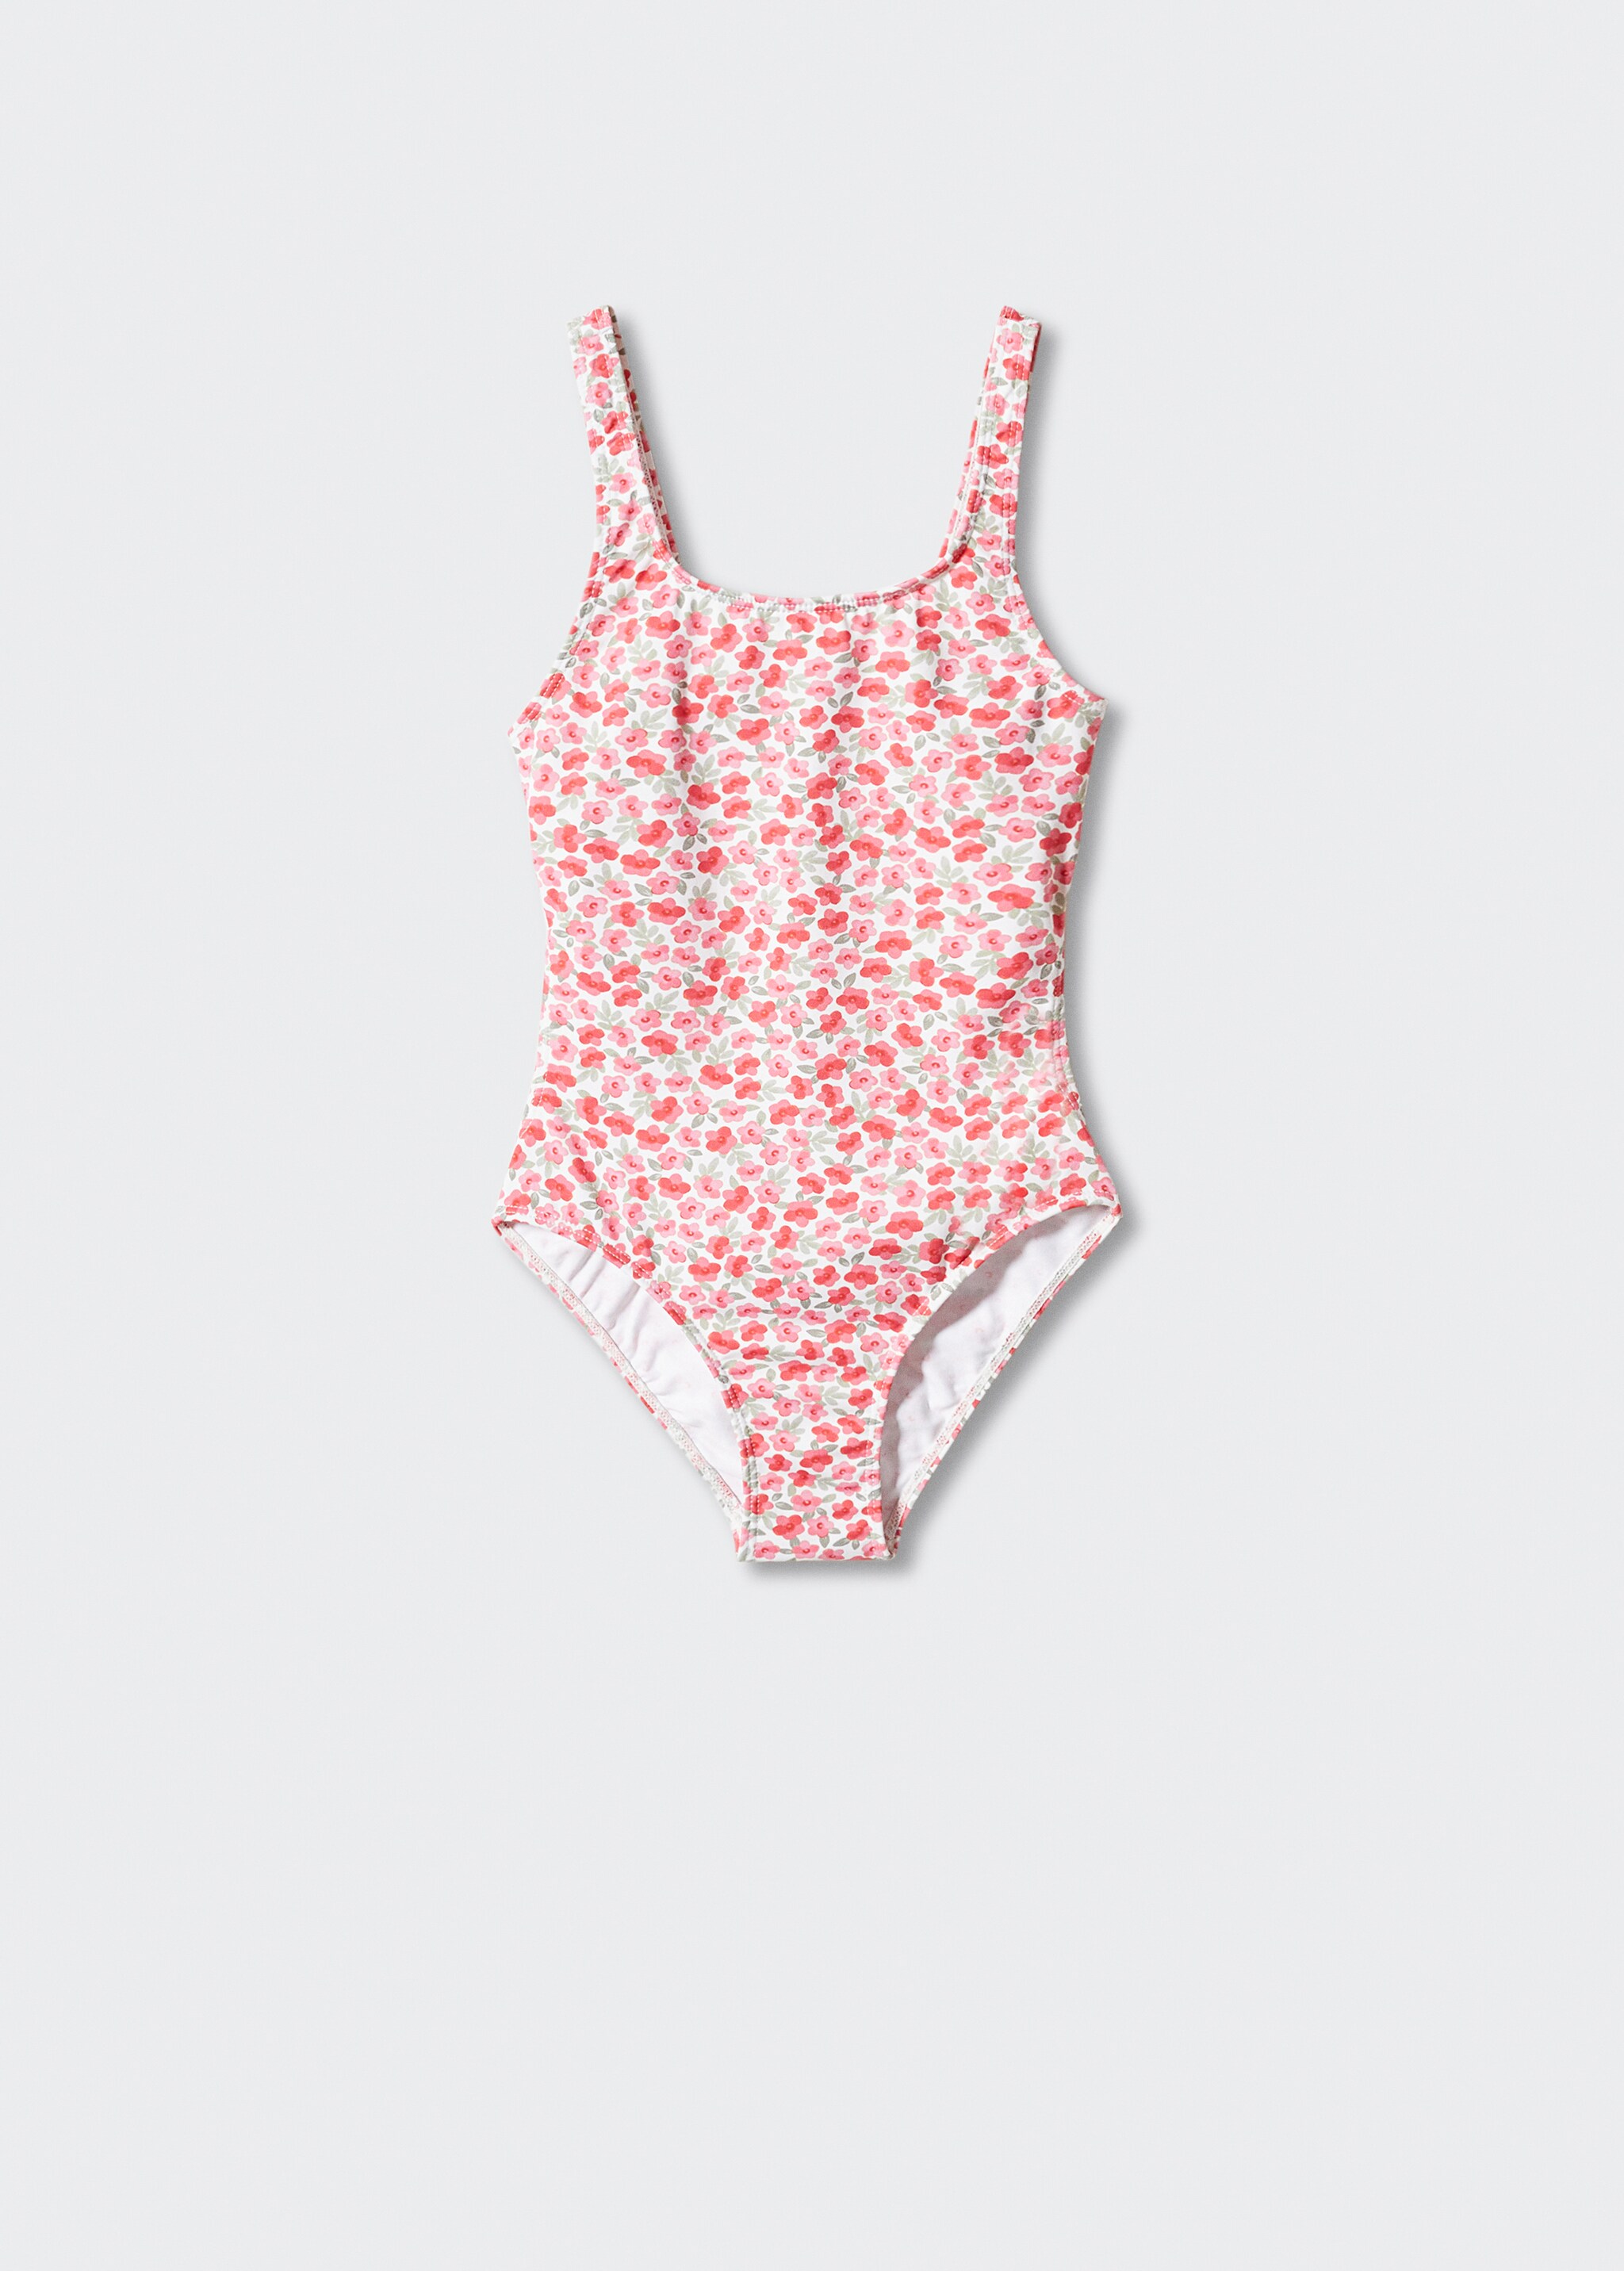 Floral print swimsuit - Article without model